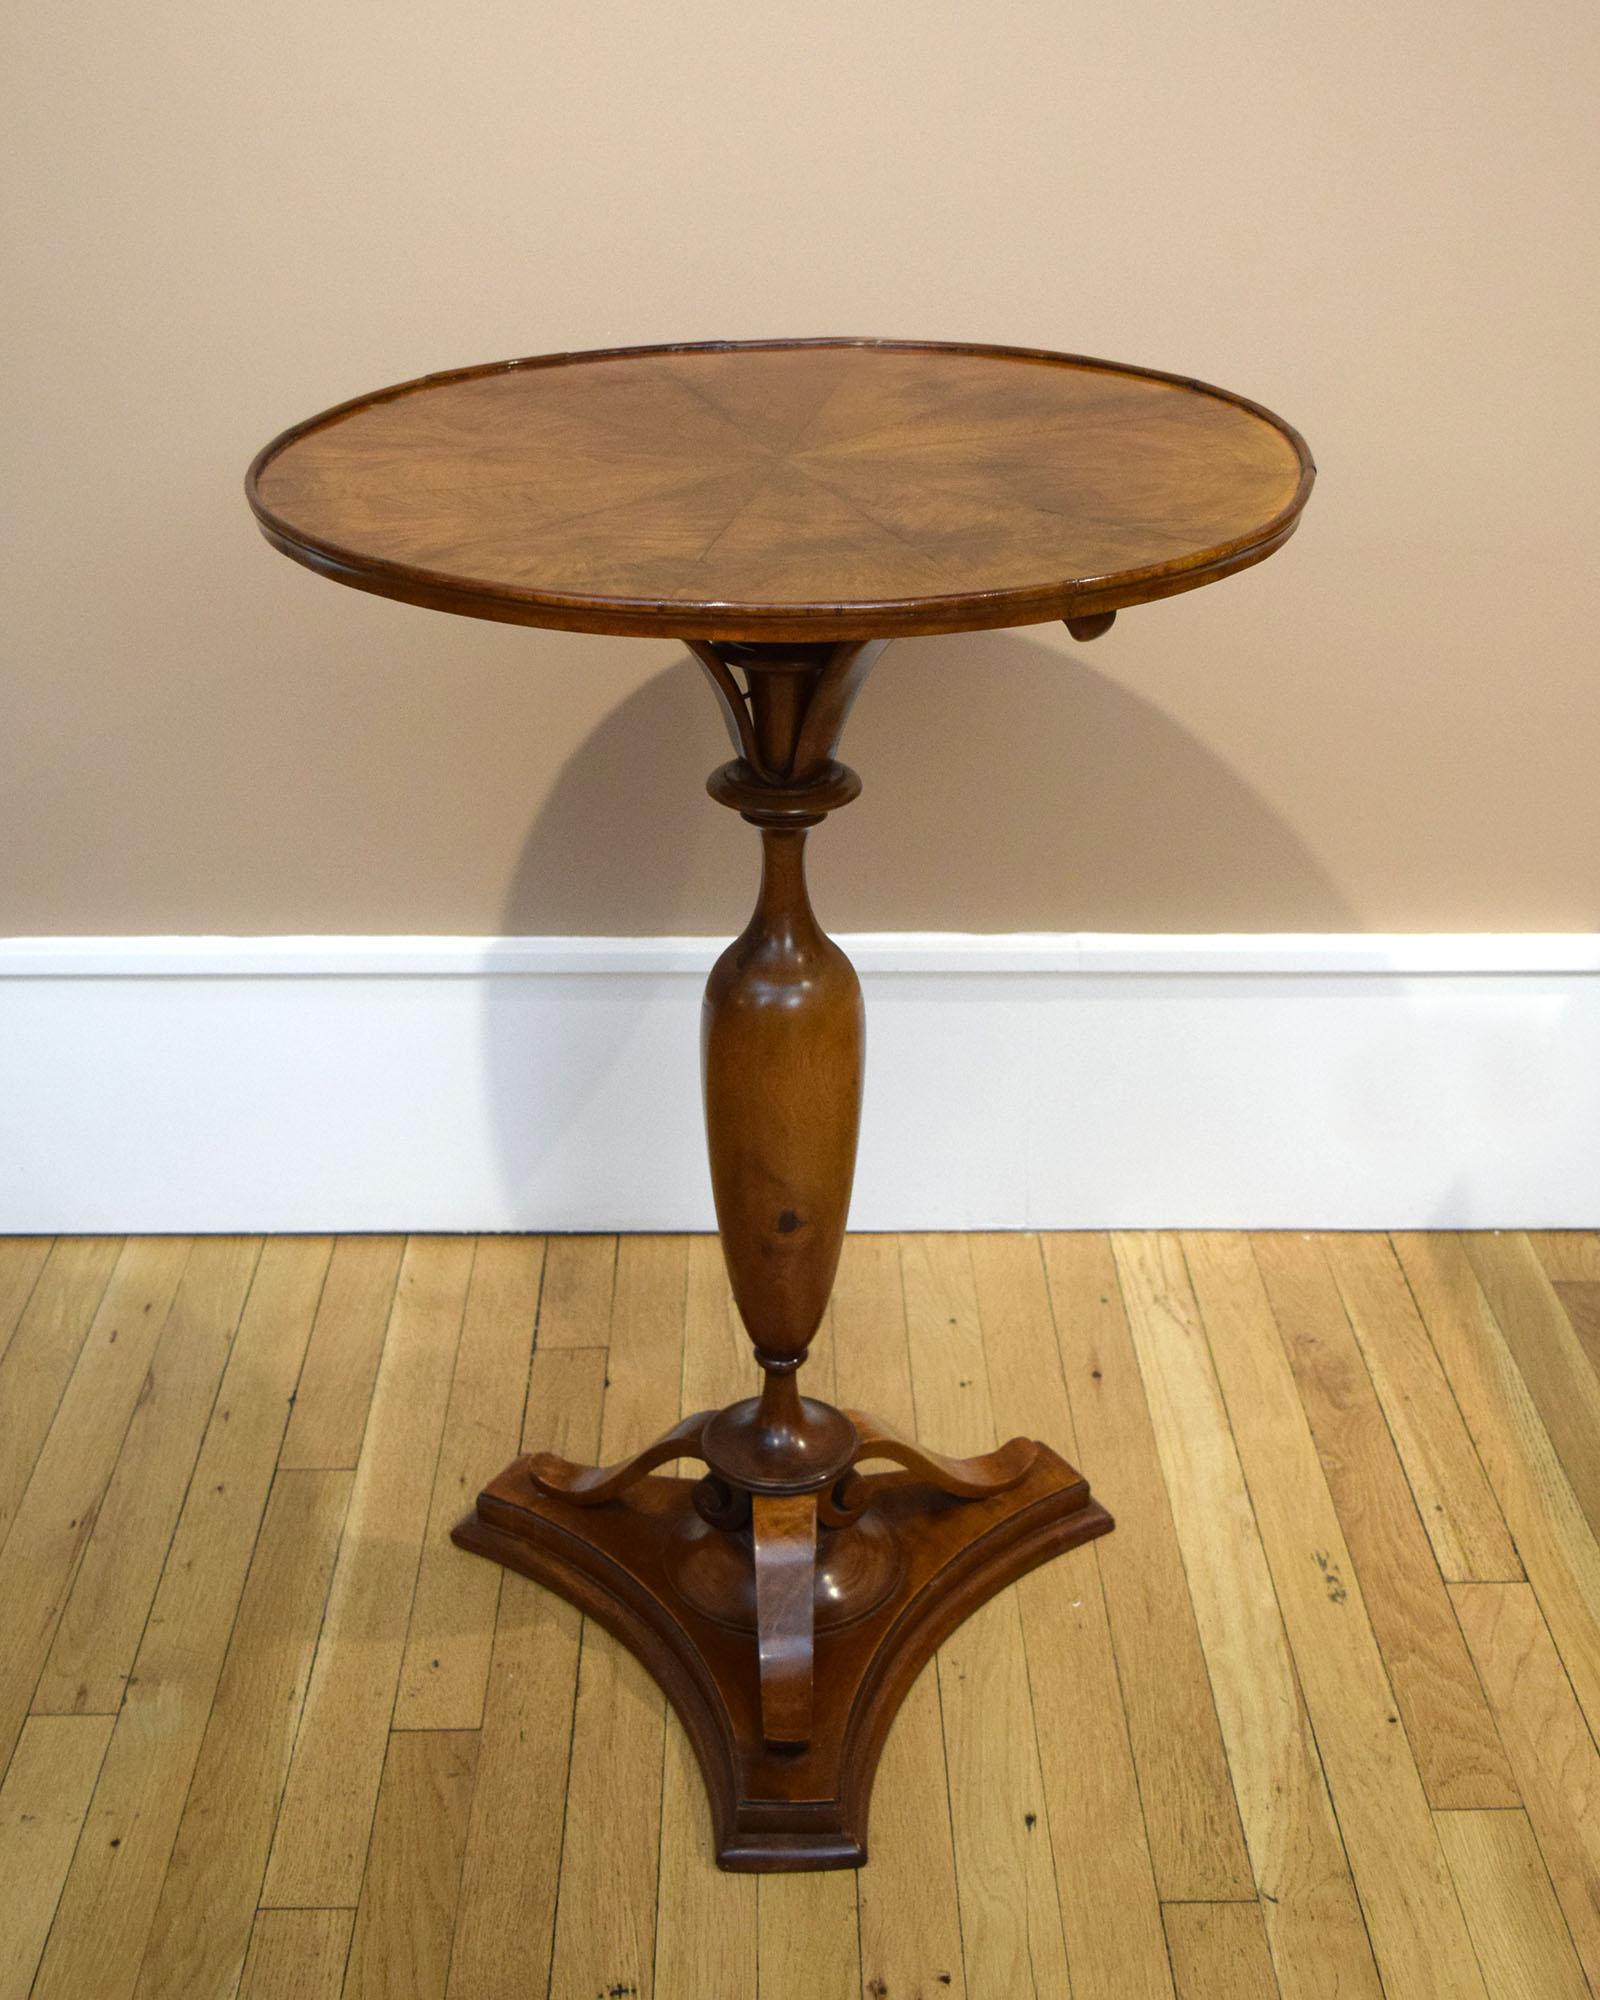 Elegance and charm tend to be mutually exclusive, but the best Biedermeier furniture often embodies both. Our side table was finely made of solid and veneered walnut. By sliding a bronze latch, the top tilts vertically. This is a common enough